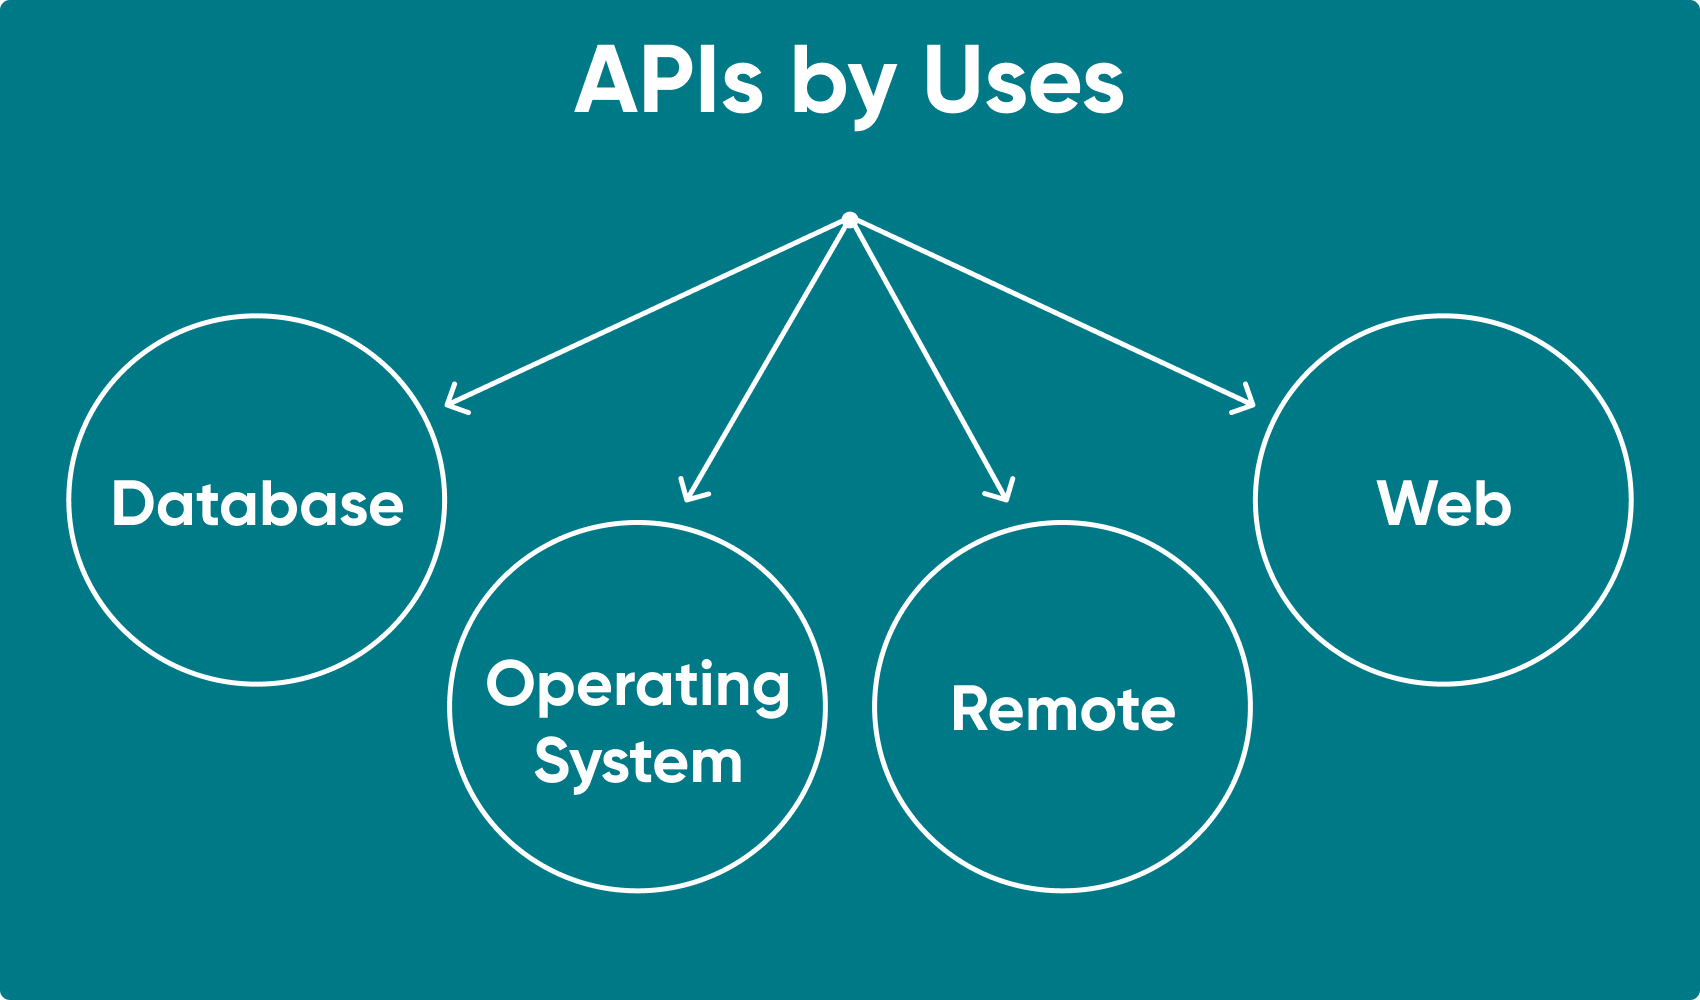 A diagram showing APIs according to the four main uses.